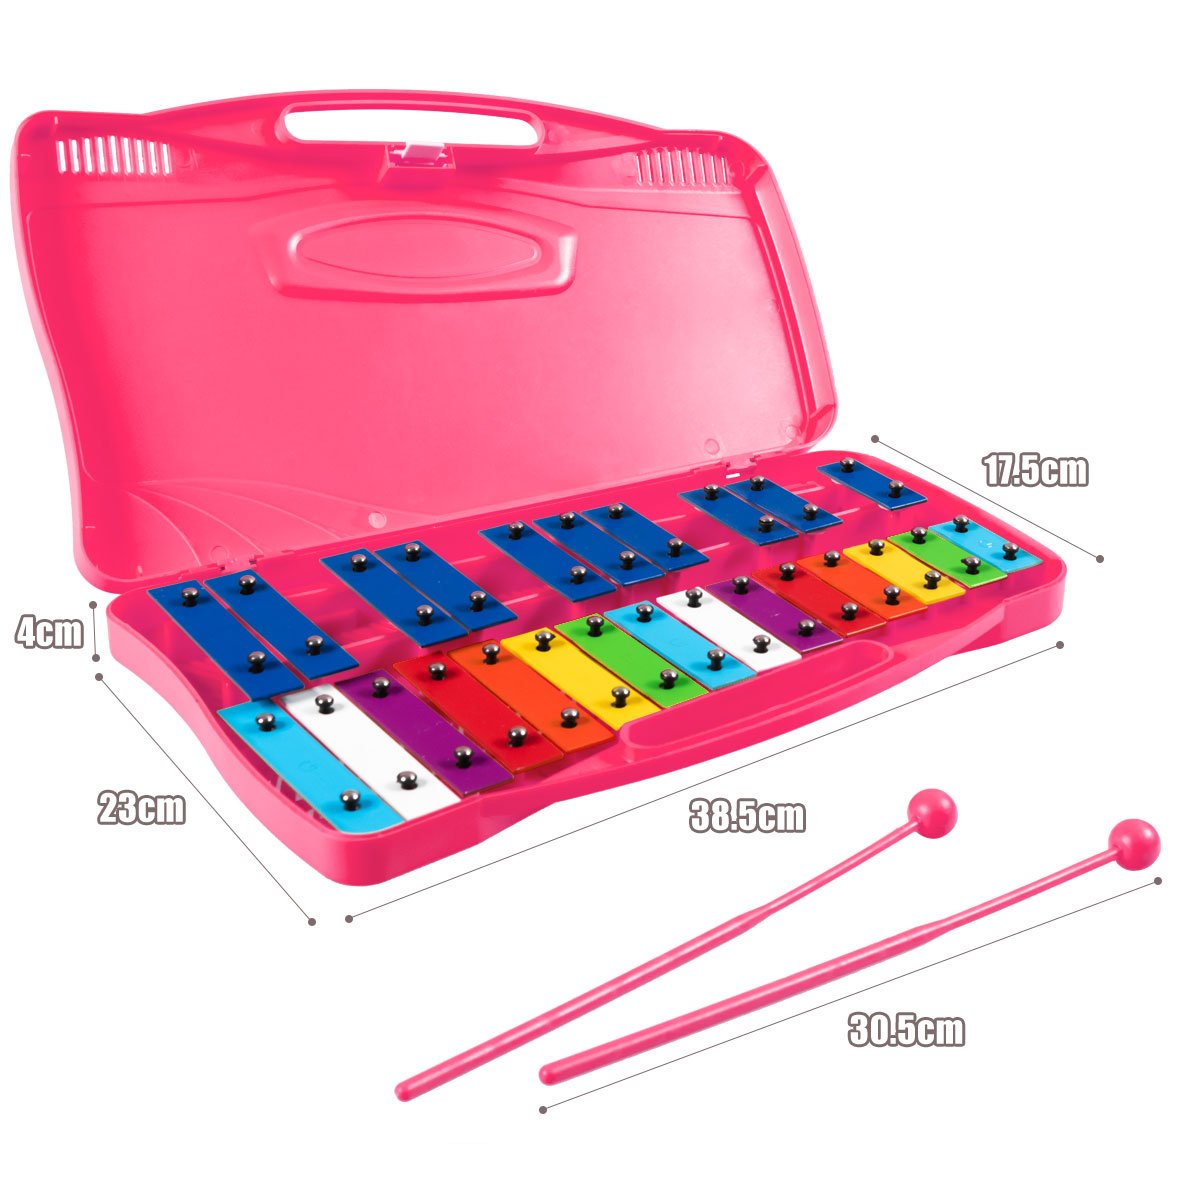 Joyful Rhythms: 25 Note Xylophone with Suitcase for Kids Pink